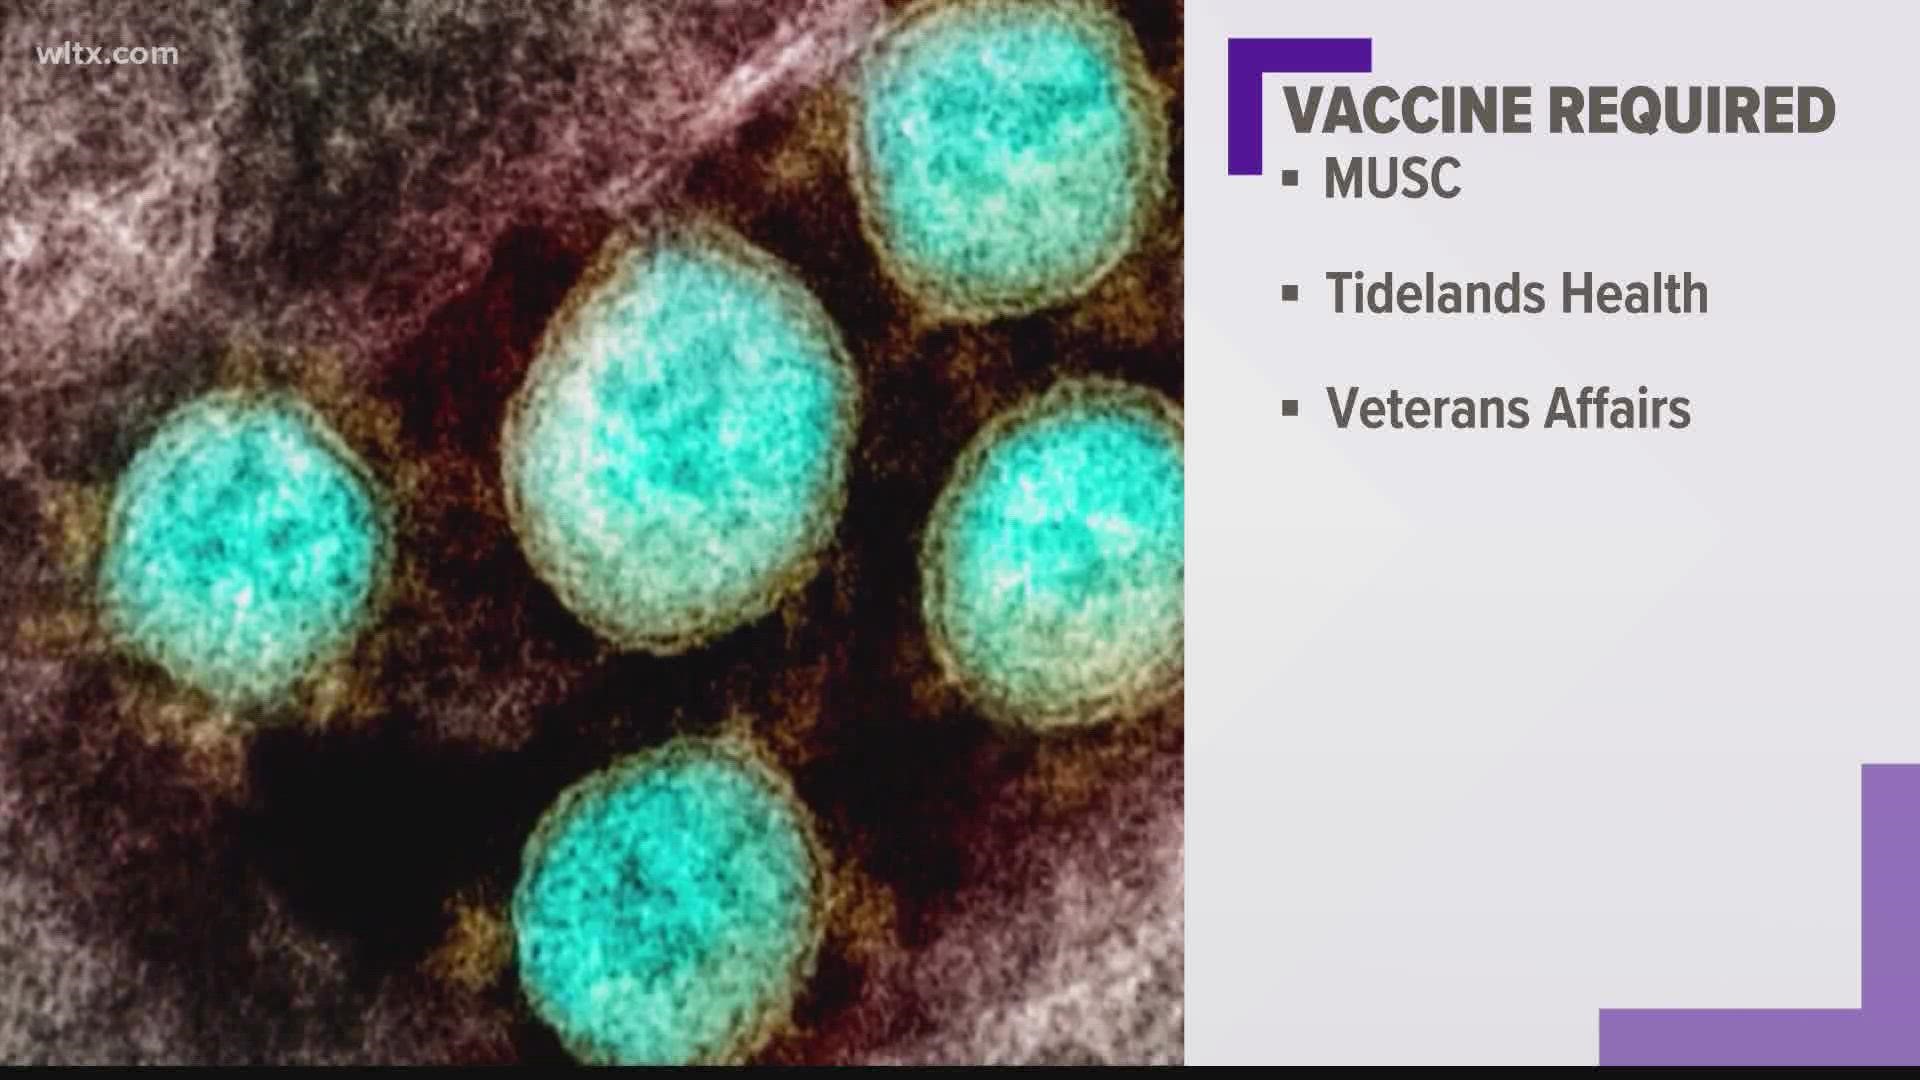 Three hospitals in South Carolina now require medical personnel to get the COVID-19 vaccine.